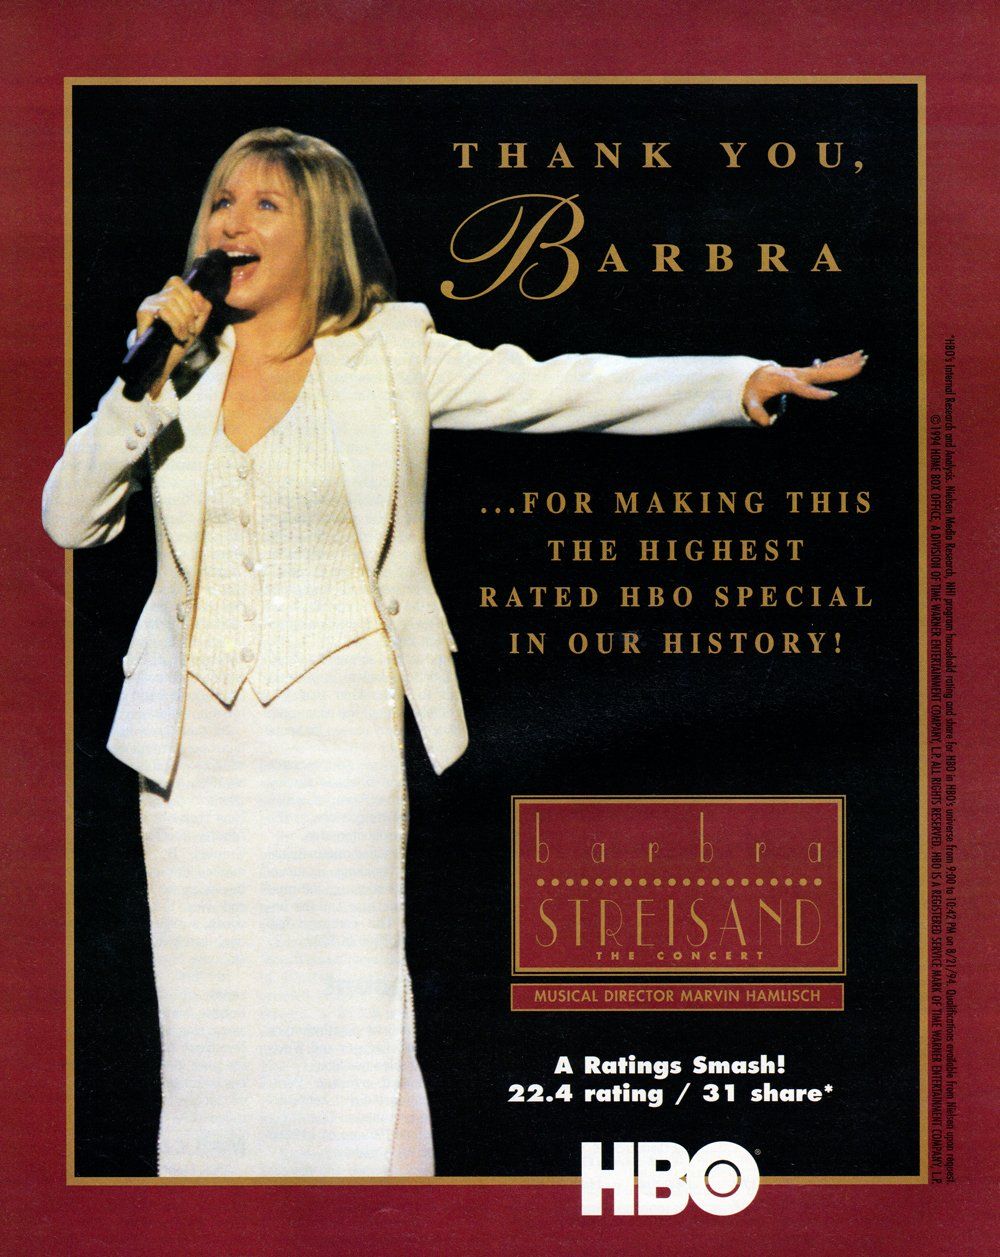 HBO Thank You ad to Barbra Streisand